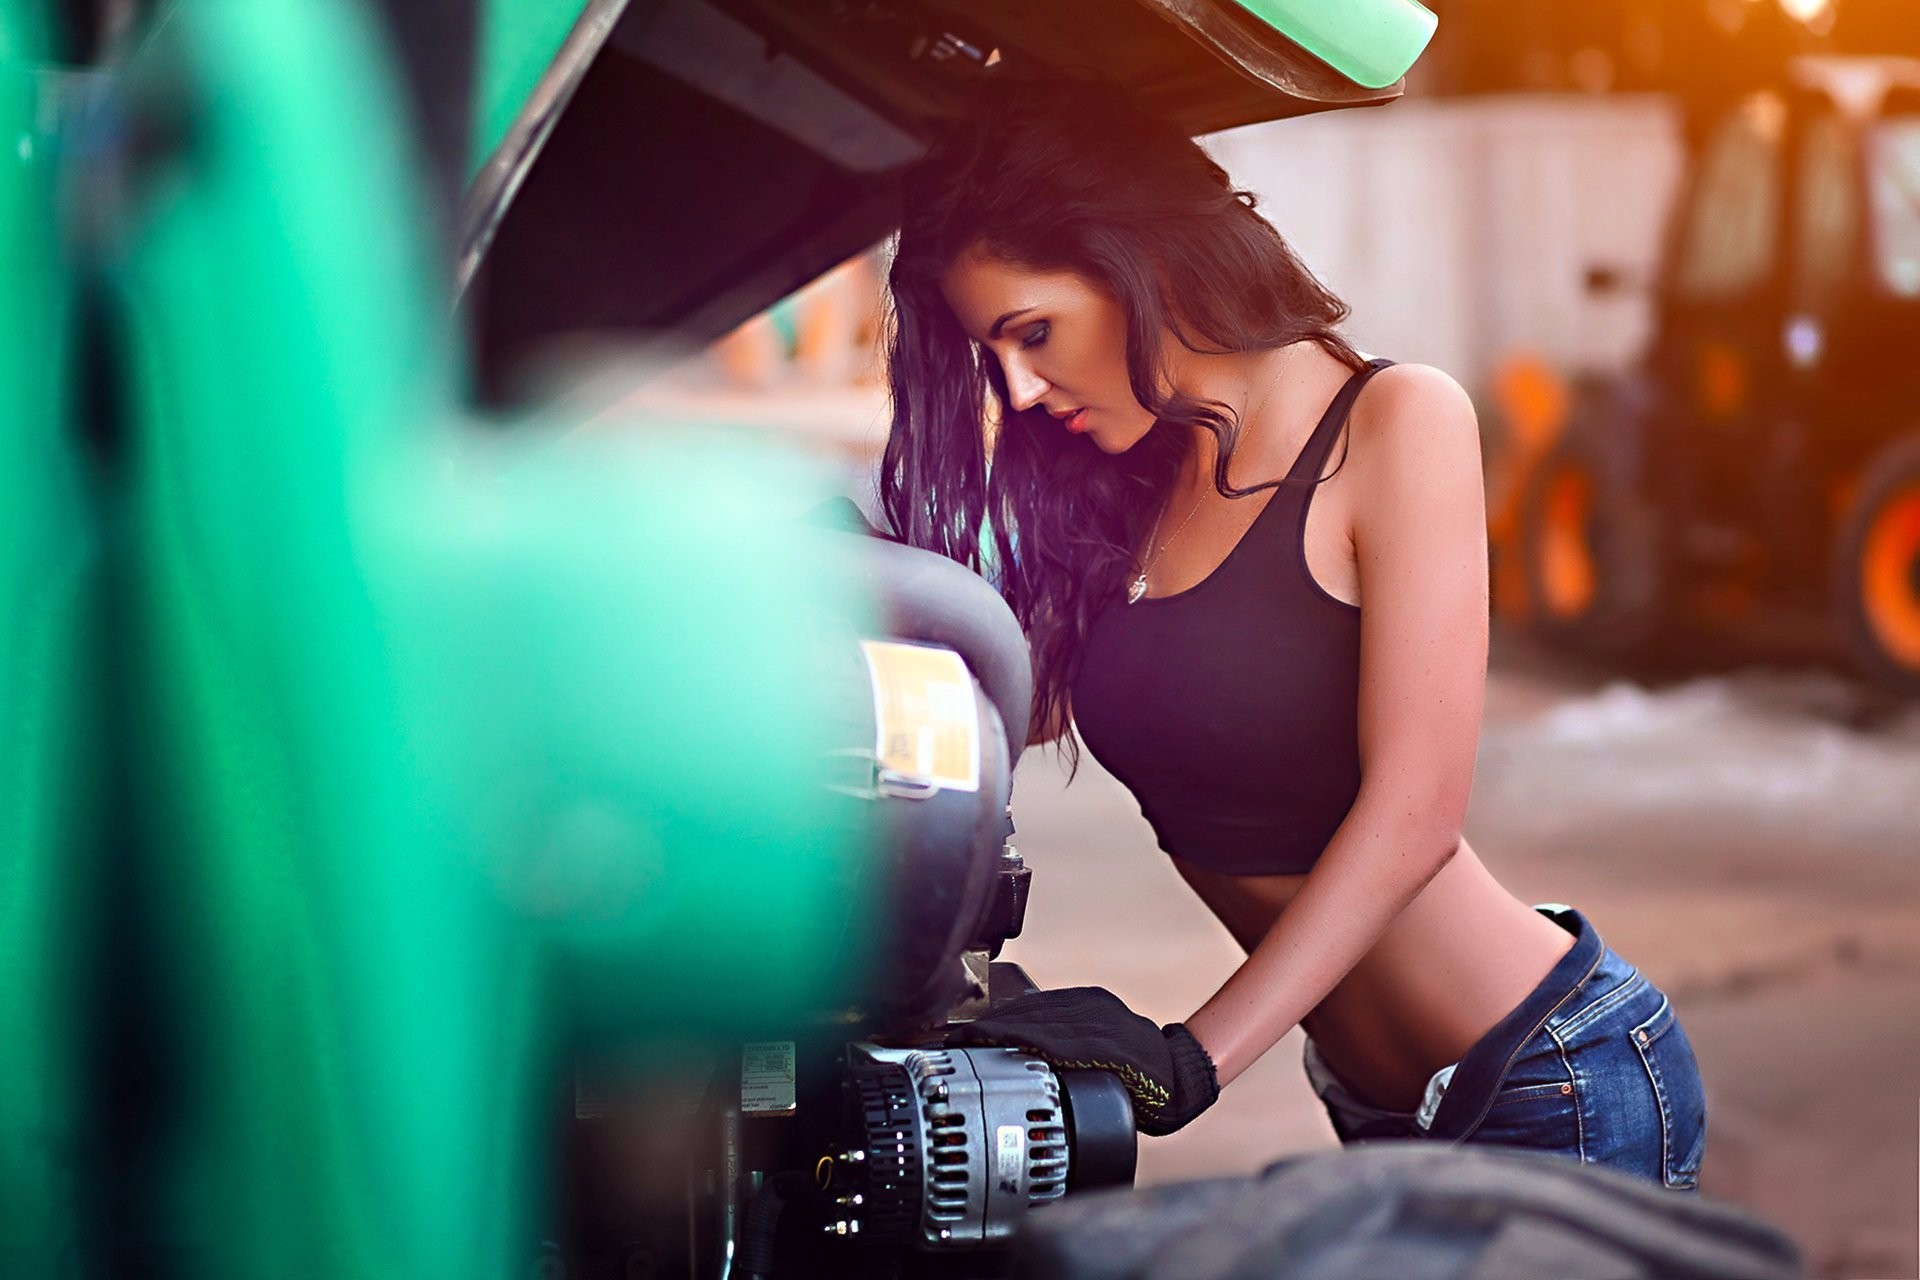 People 1920x1280 photography car brunette model women jean shorts sports bra machine lights women with cars vehicle engine necklace face profile belly slim body black top long hair lipstick gloves green cars